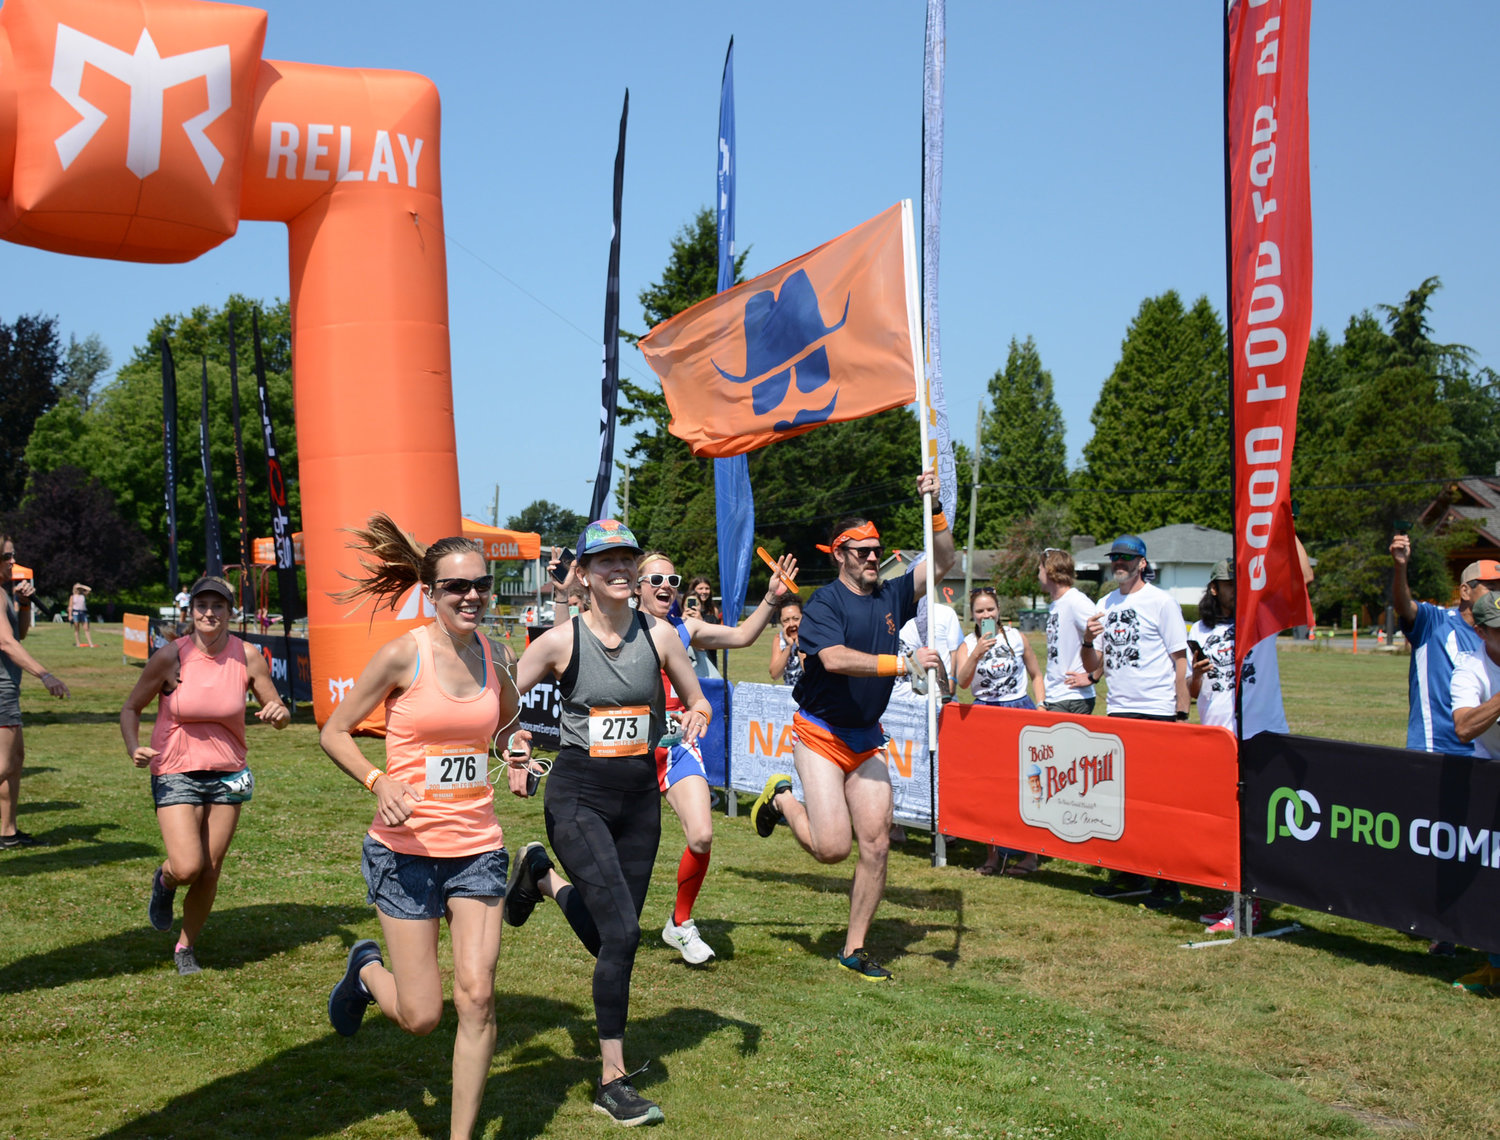 With names like “Long Distance Relay-tionship,” “Sleeveless In Seattle” and “Strangers with Candy,” a total of 190 teams competed in the Ragnar Road Northwest Passage, a 200-mile relay running race. Teams sent off their first runners in an interval wave start July 9 at Peace Arch Park and finished the next day in Langley. The overall winning time was nearly 22 hours.